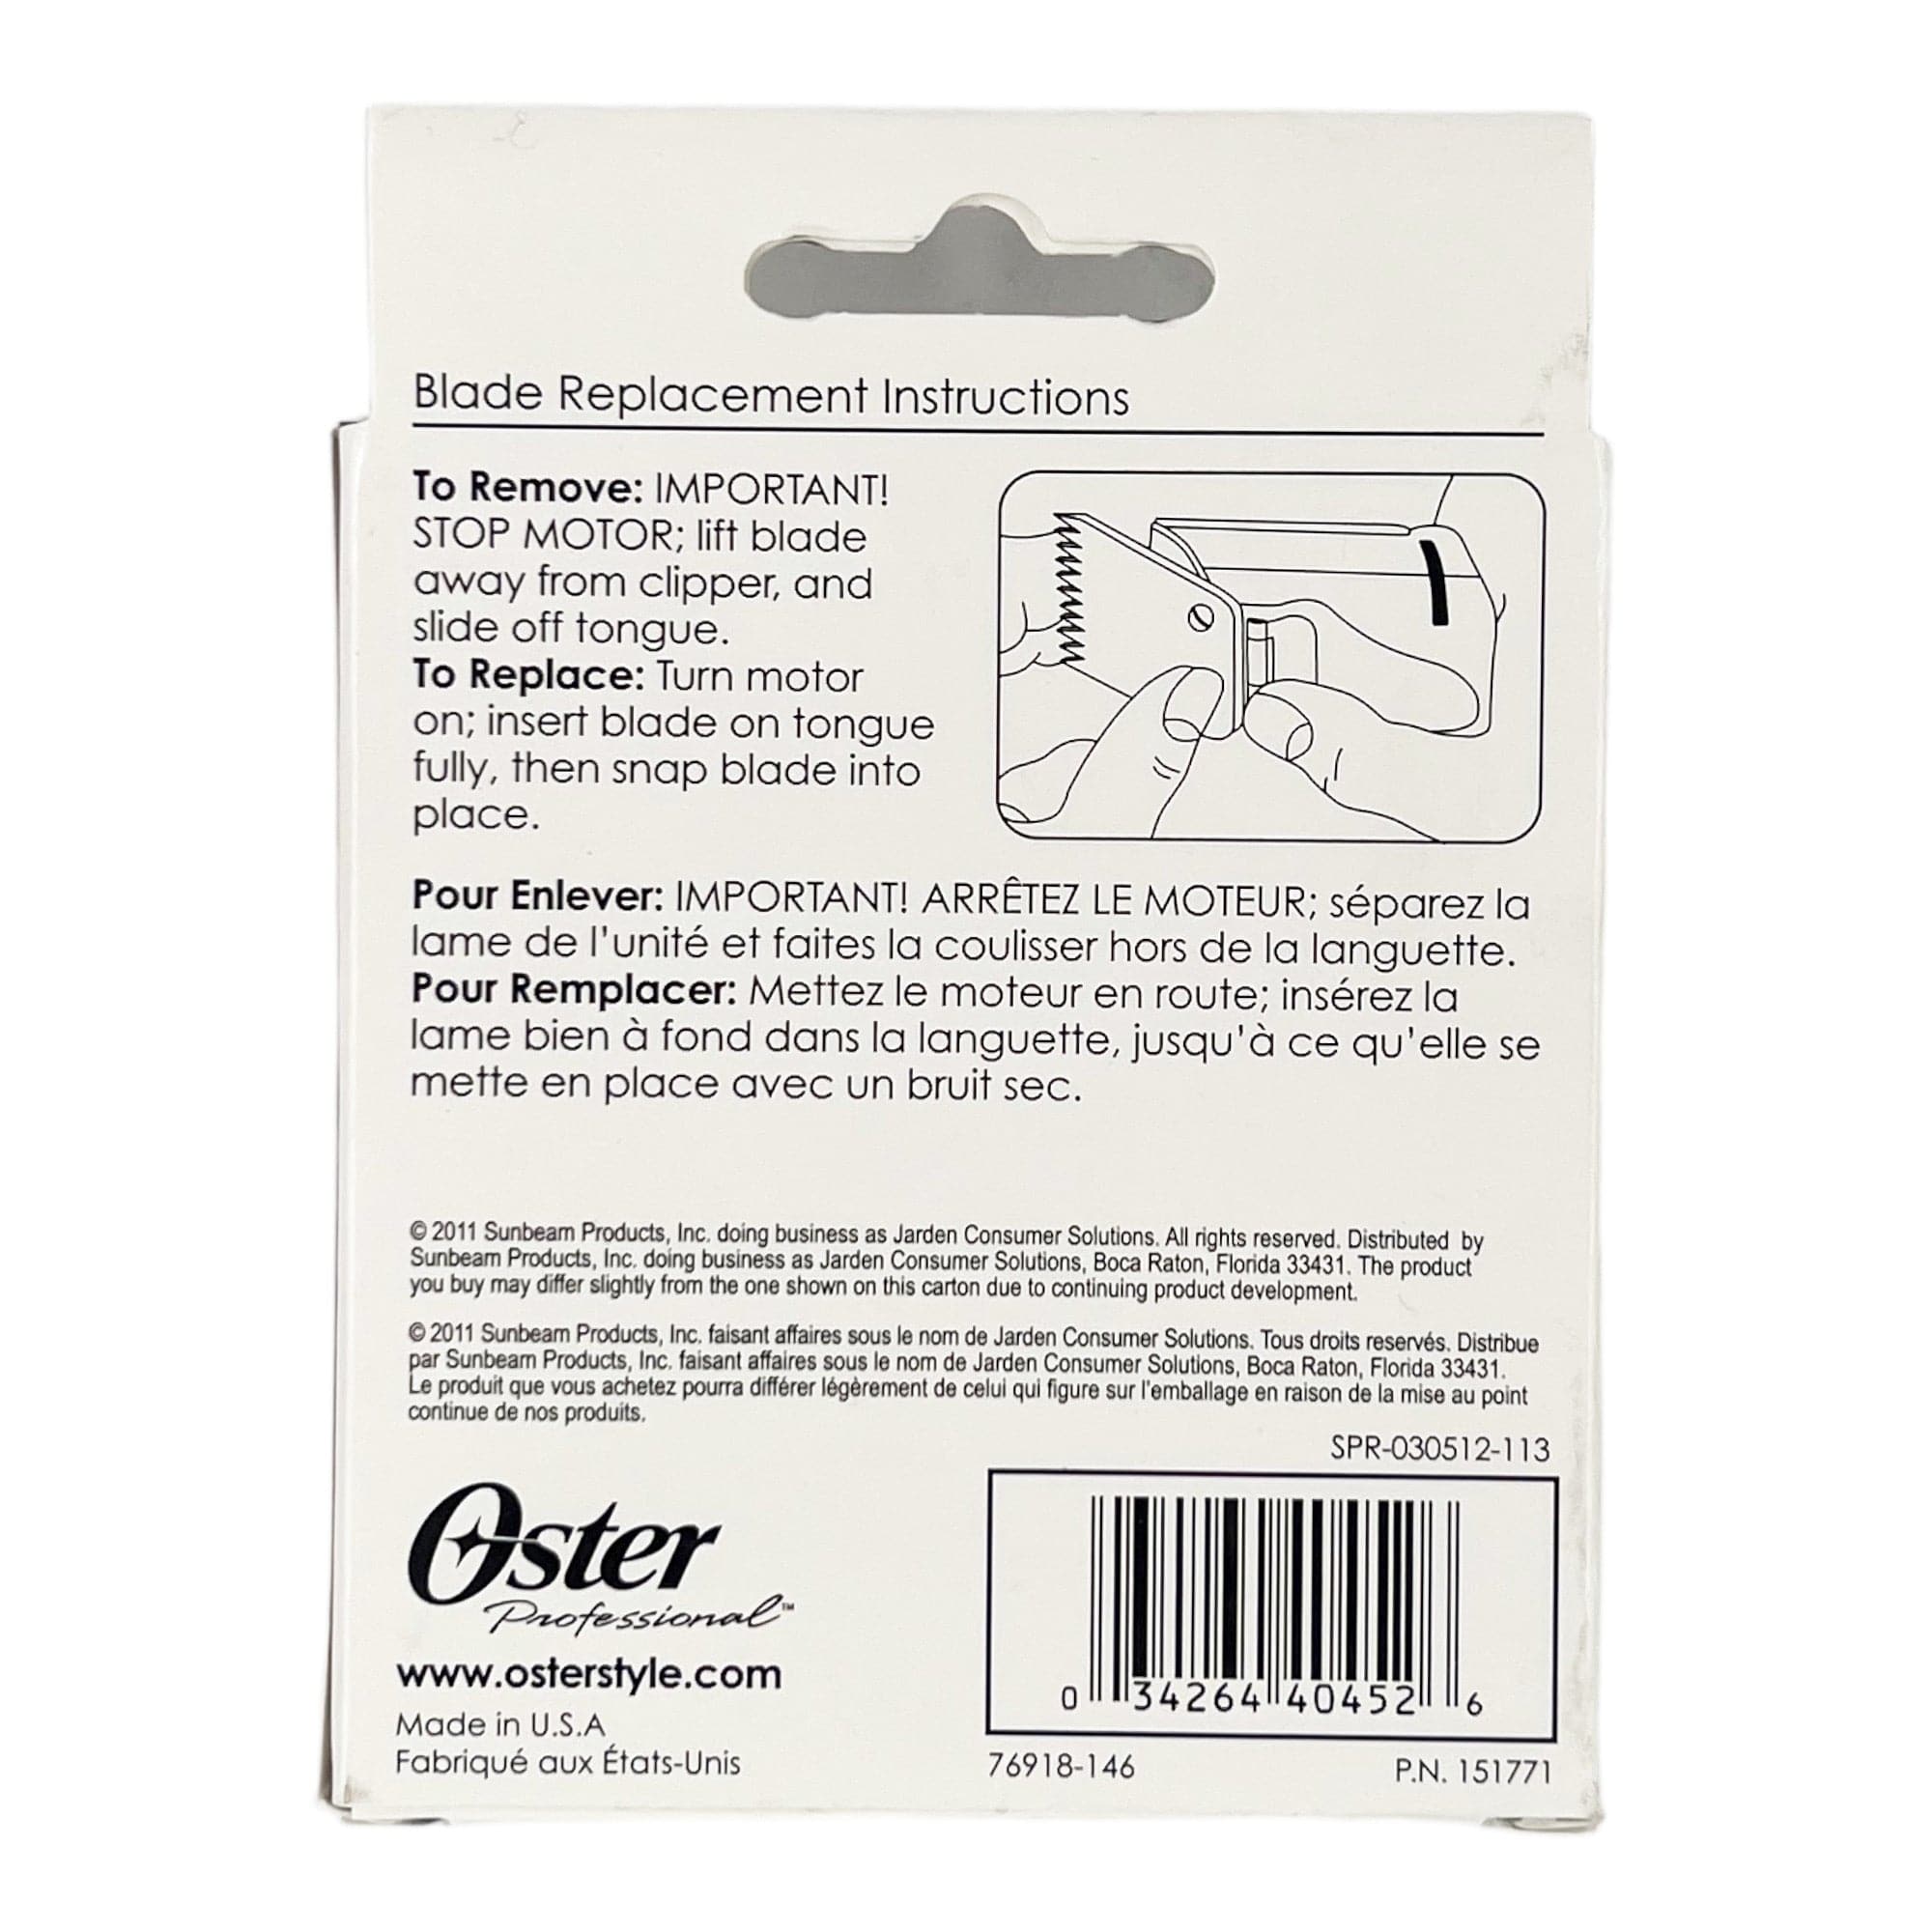 Oster - 076918-146 Detachable Blade Size 3.5 - 9.5mm